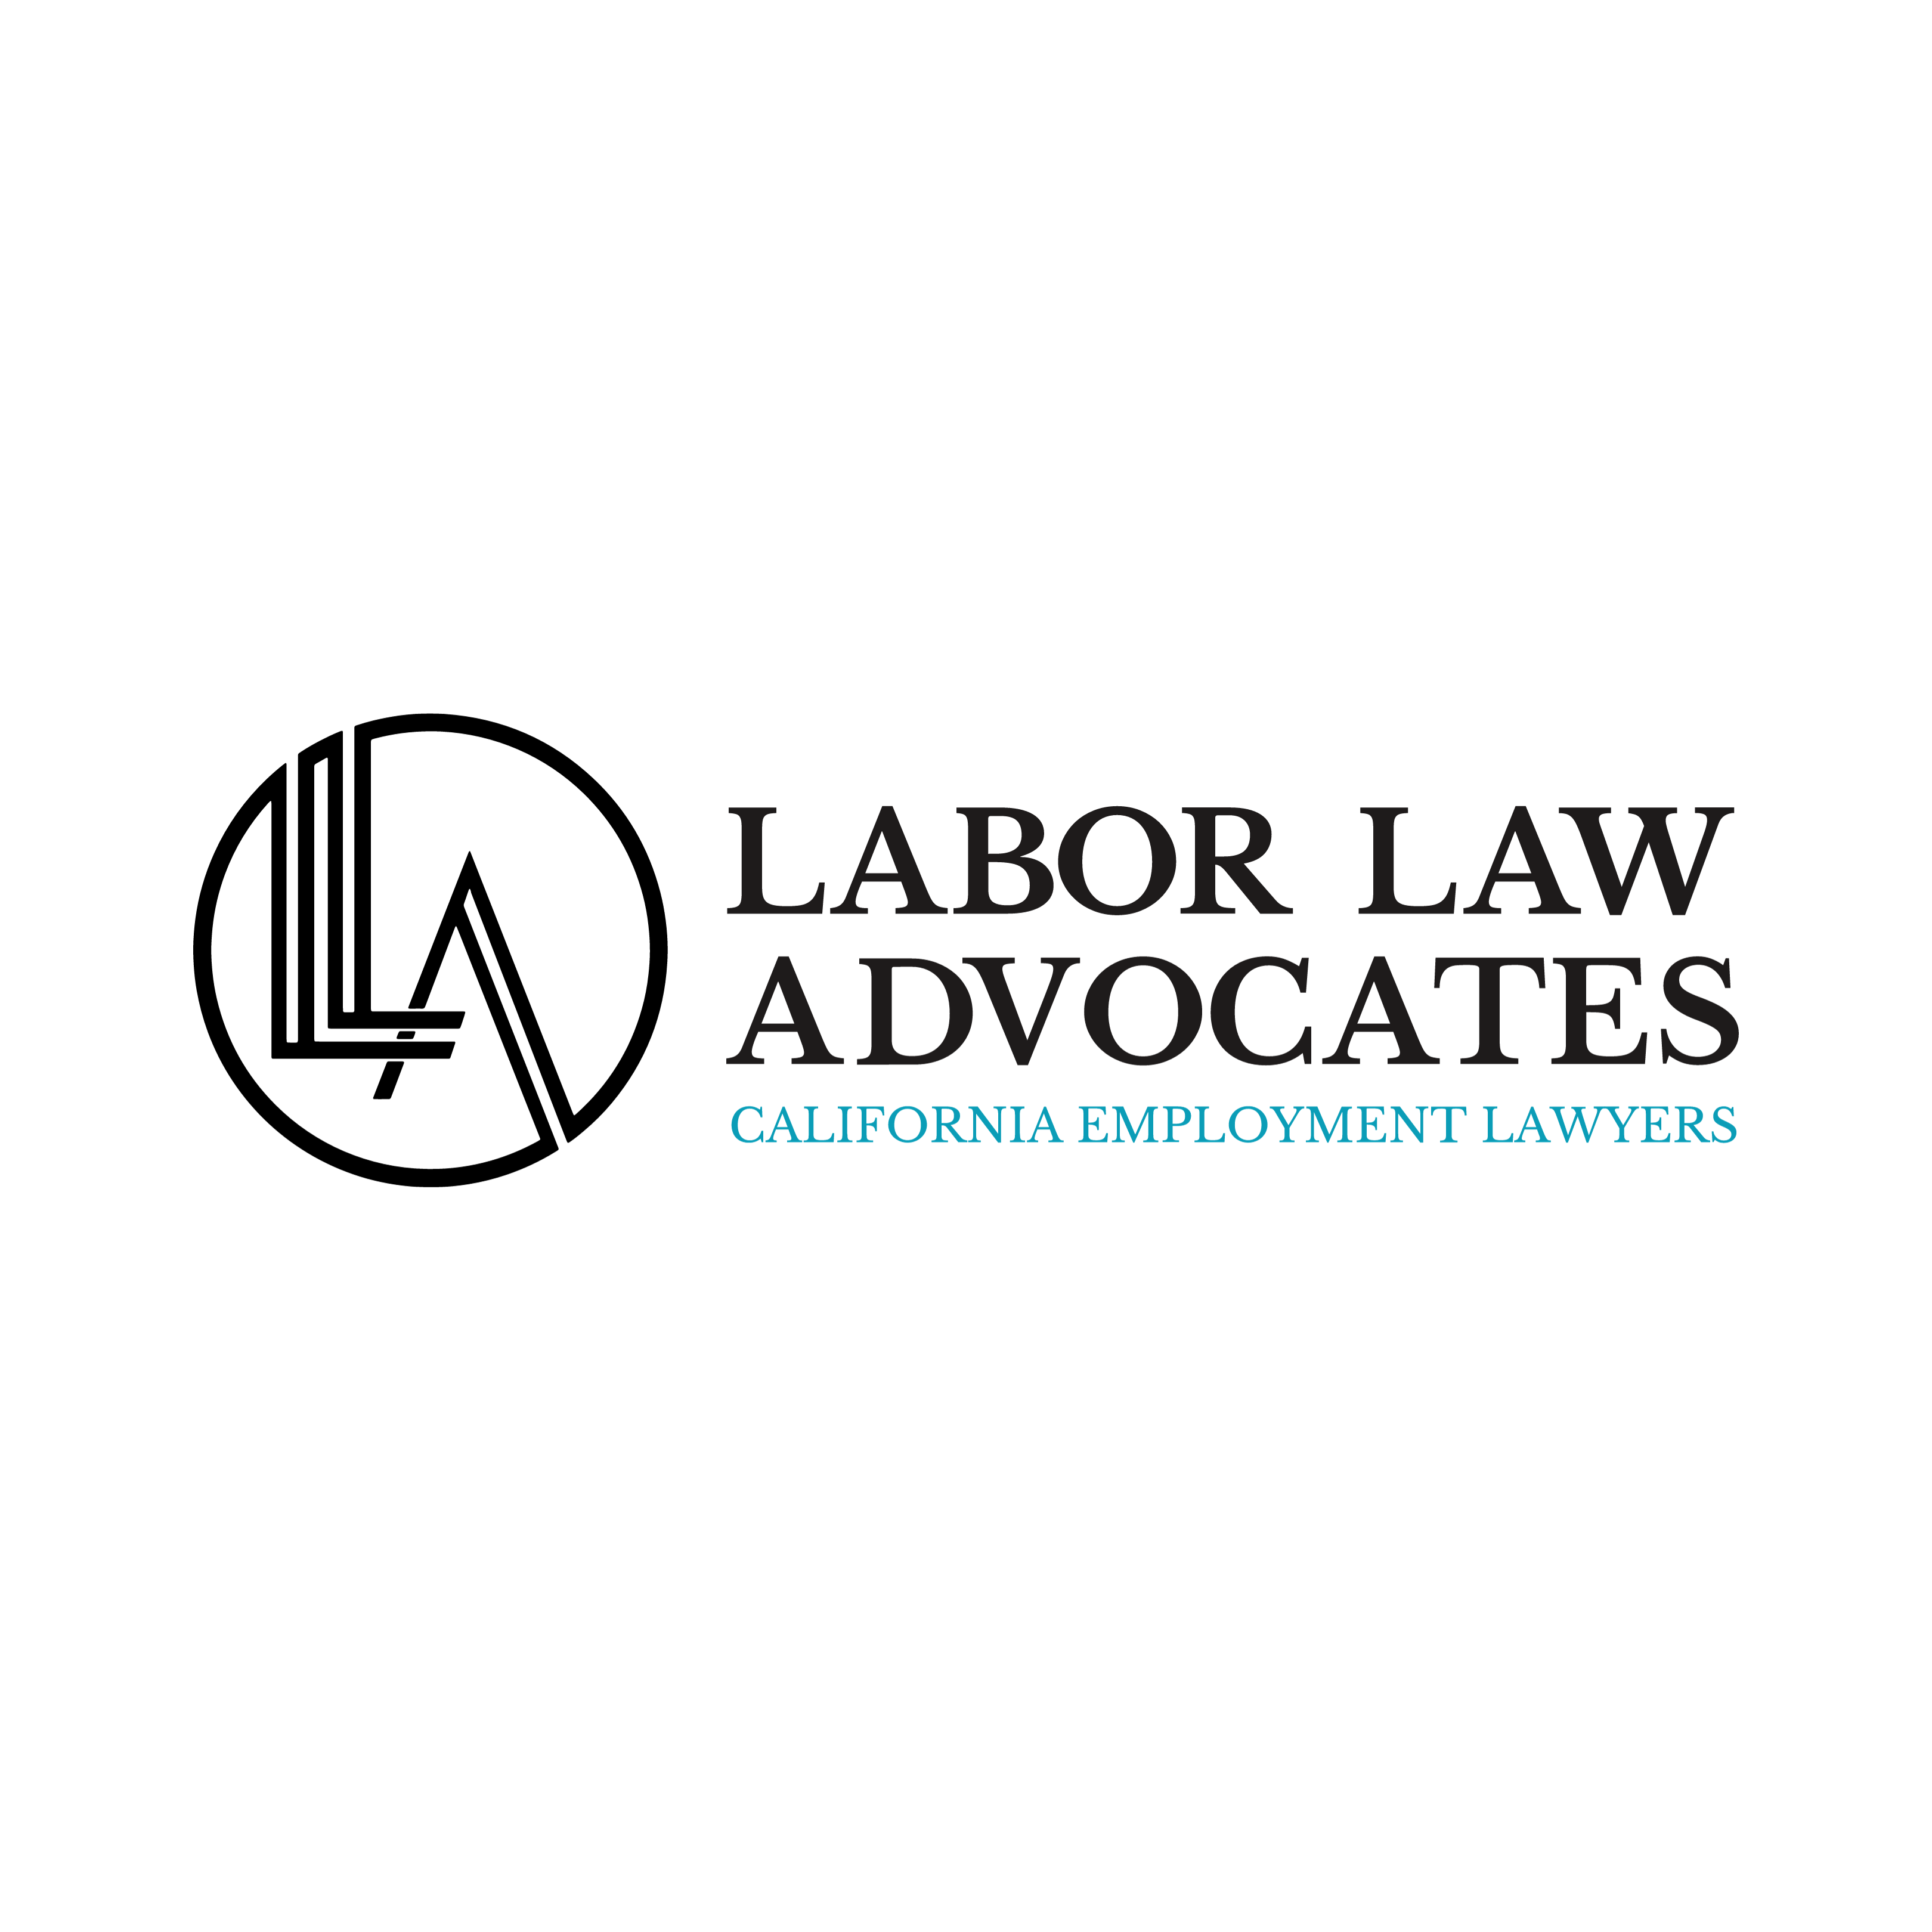 Business logo of Labor Law Advocates California Employment Lawyers